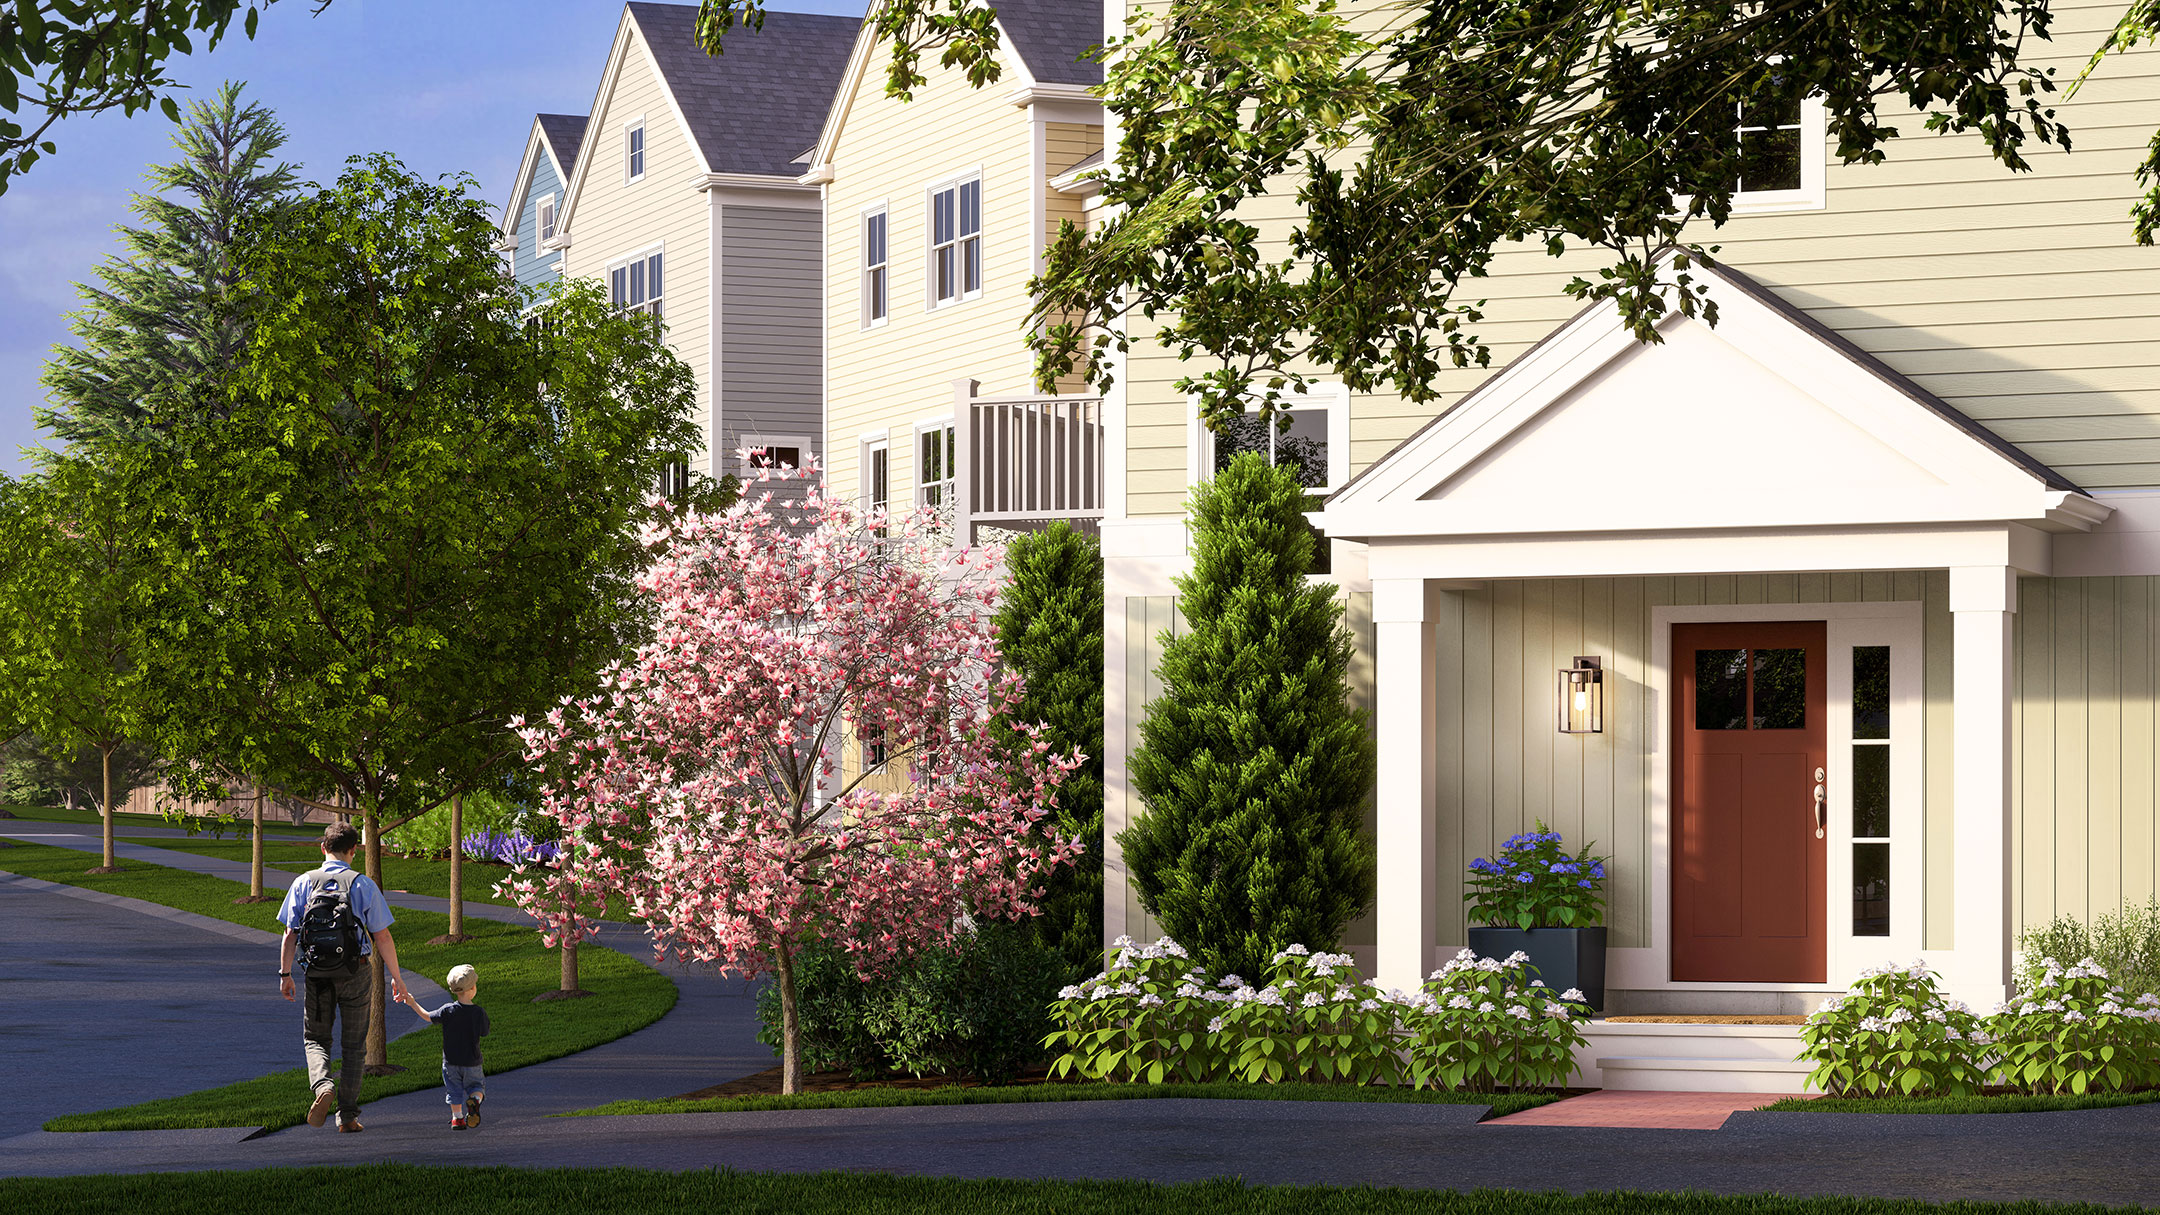 Explore the Scenic Walkable Streets and Paths of Raynham's Townhomes